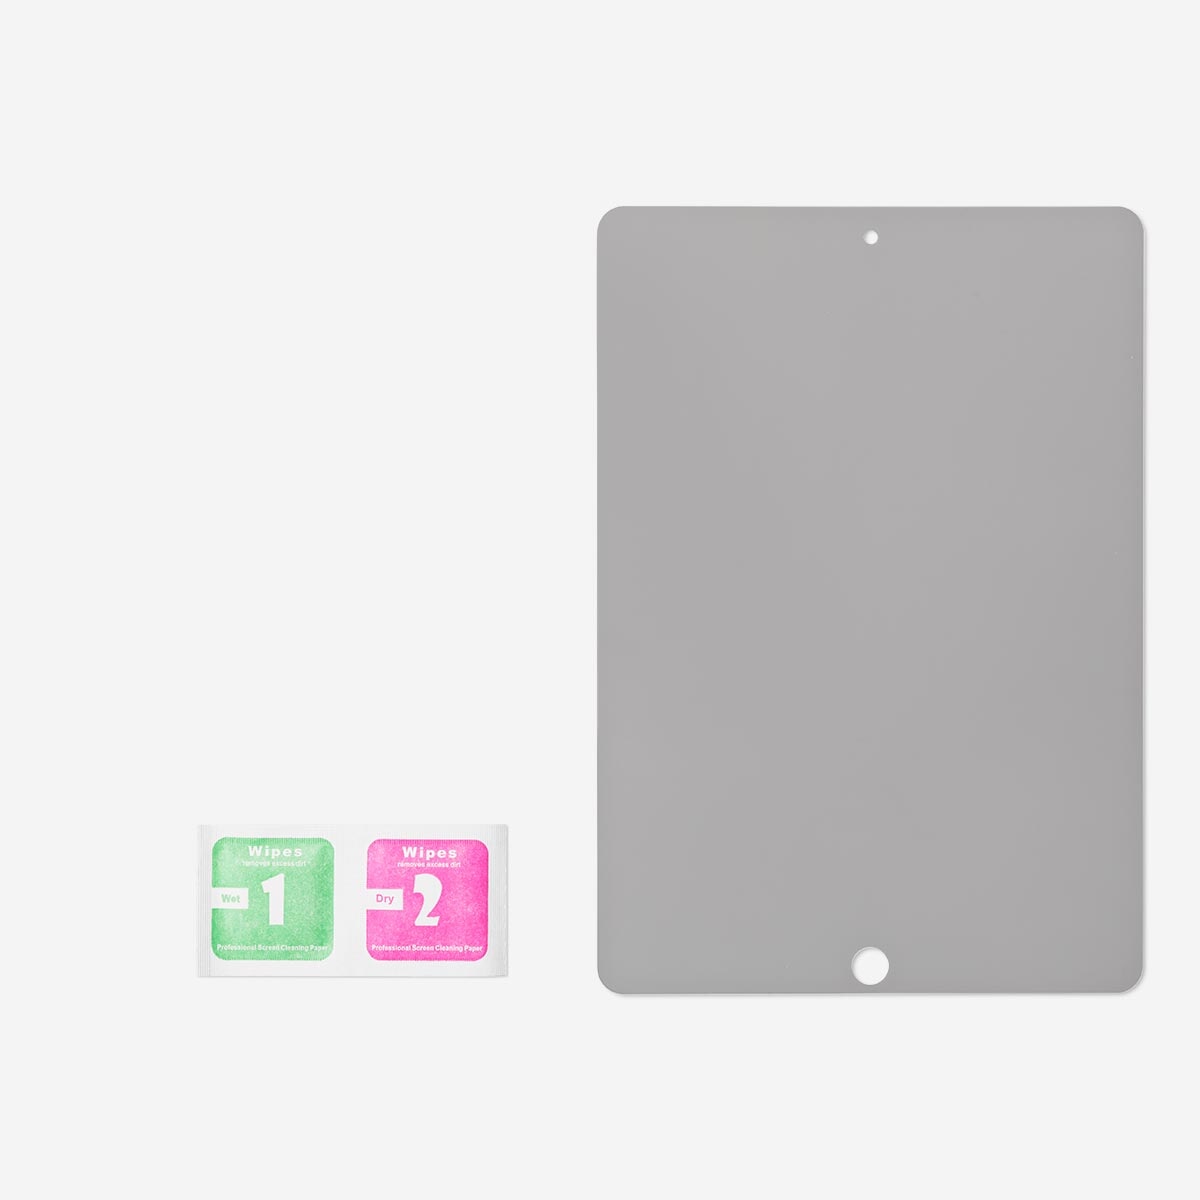 Screen protector with privacy filter. Fits iPad 5, 6 Media Flying Tiger Copenhagen 